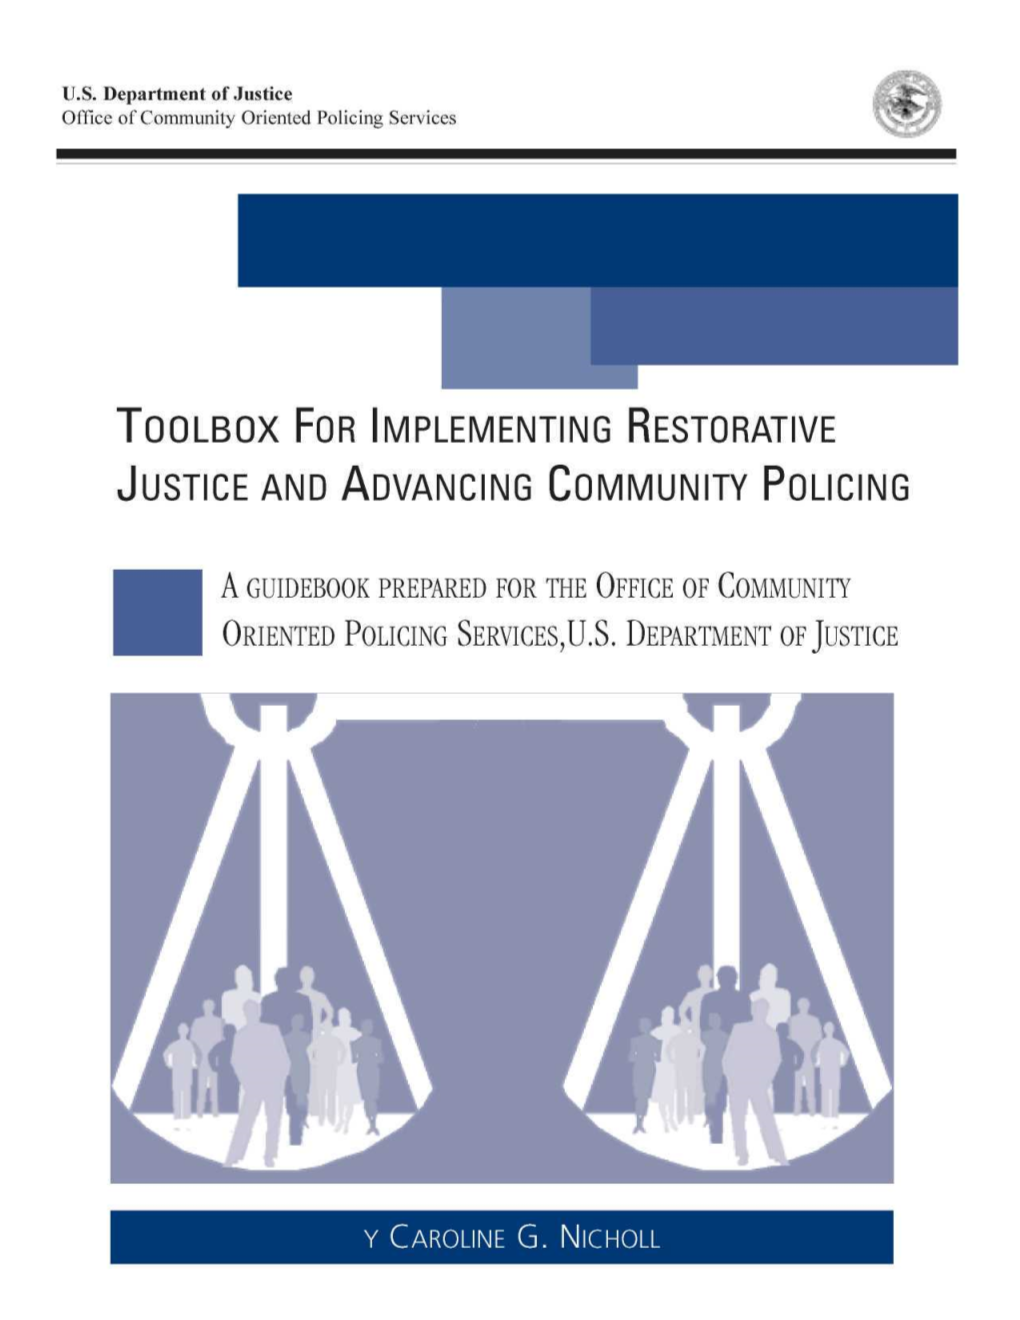 Toolbox for Implementing Restorative Justice and Advancing Community Policing